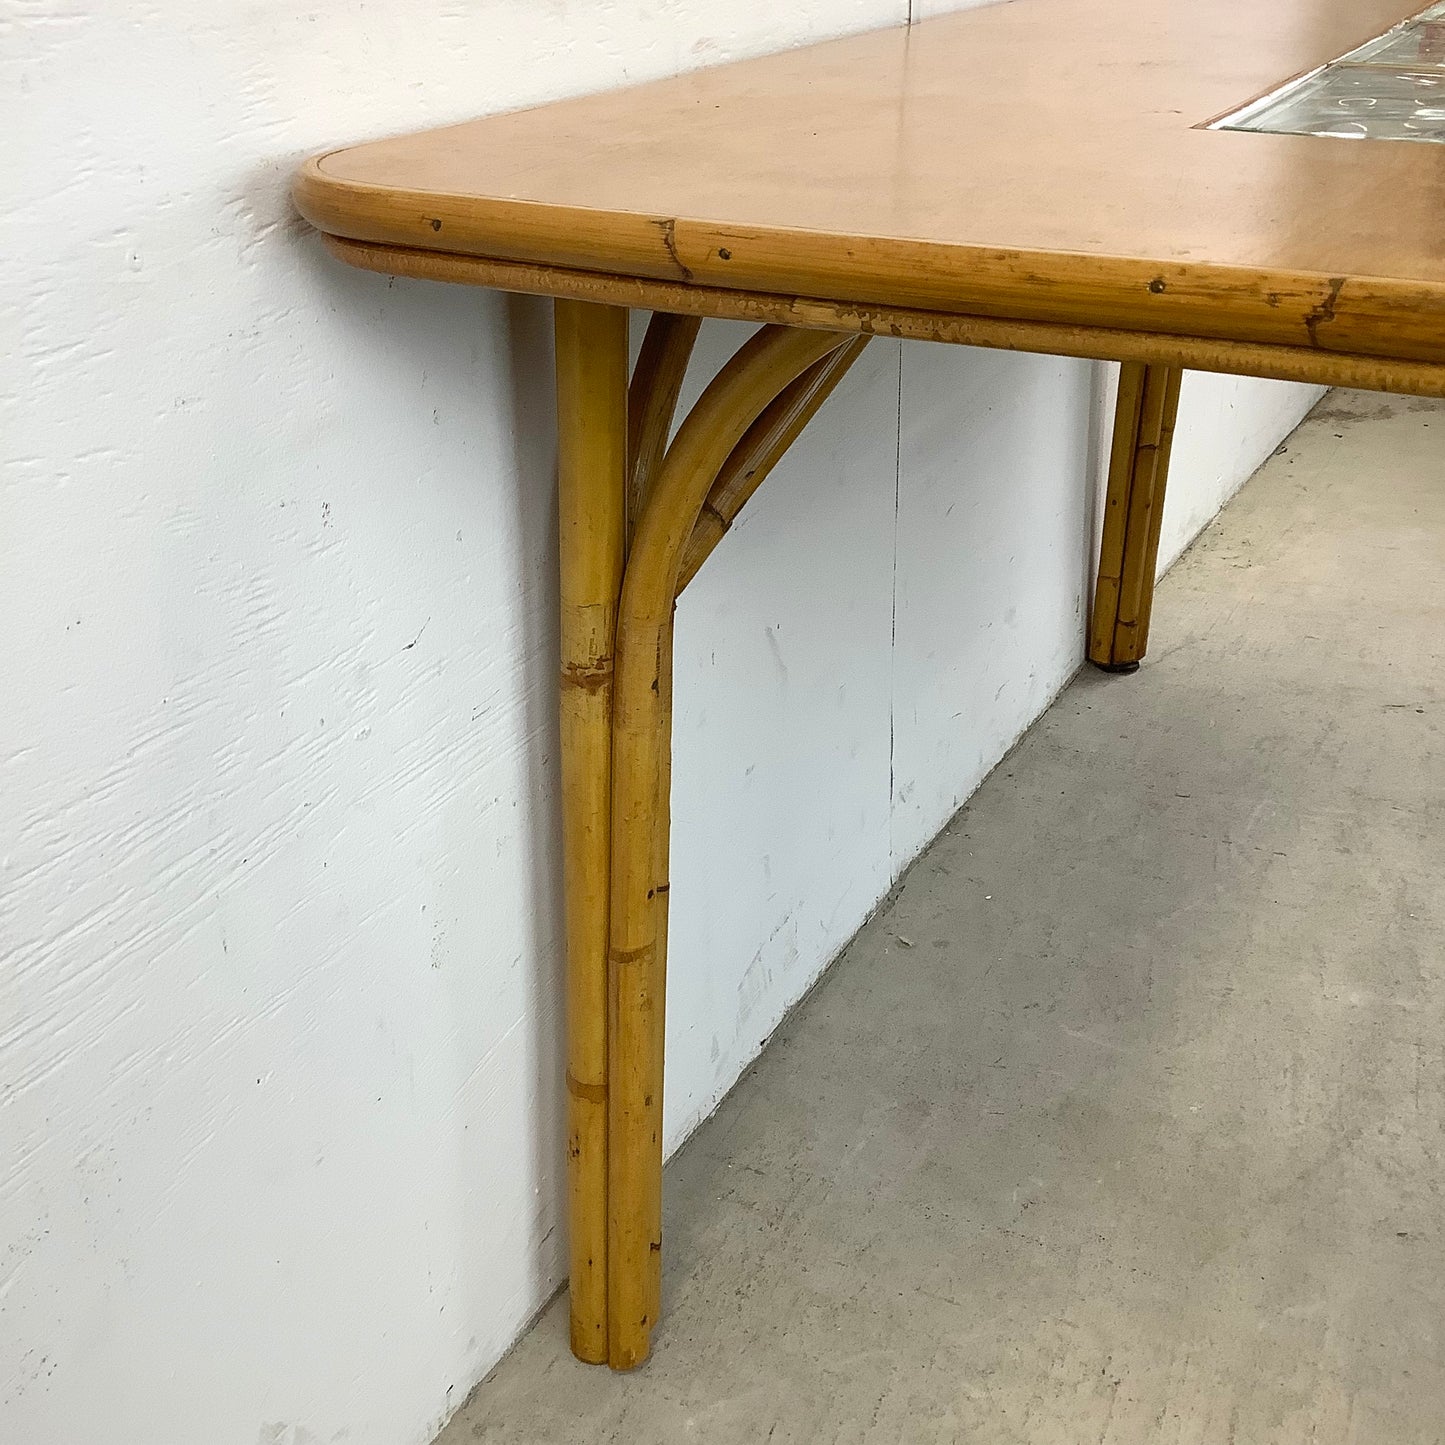 Vintage Bamboo Dining Table With Glass Inserts